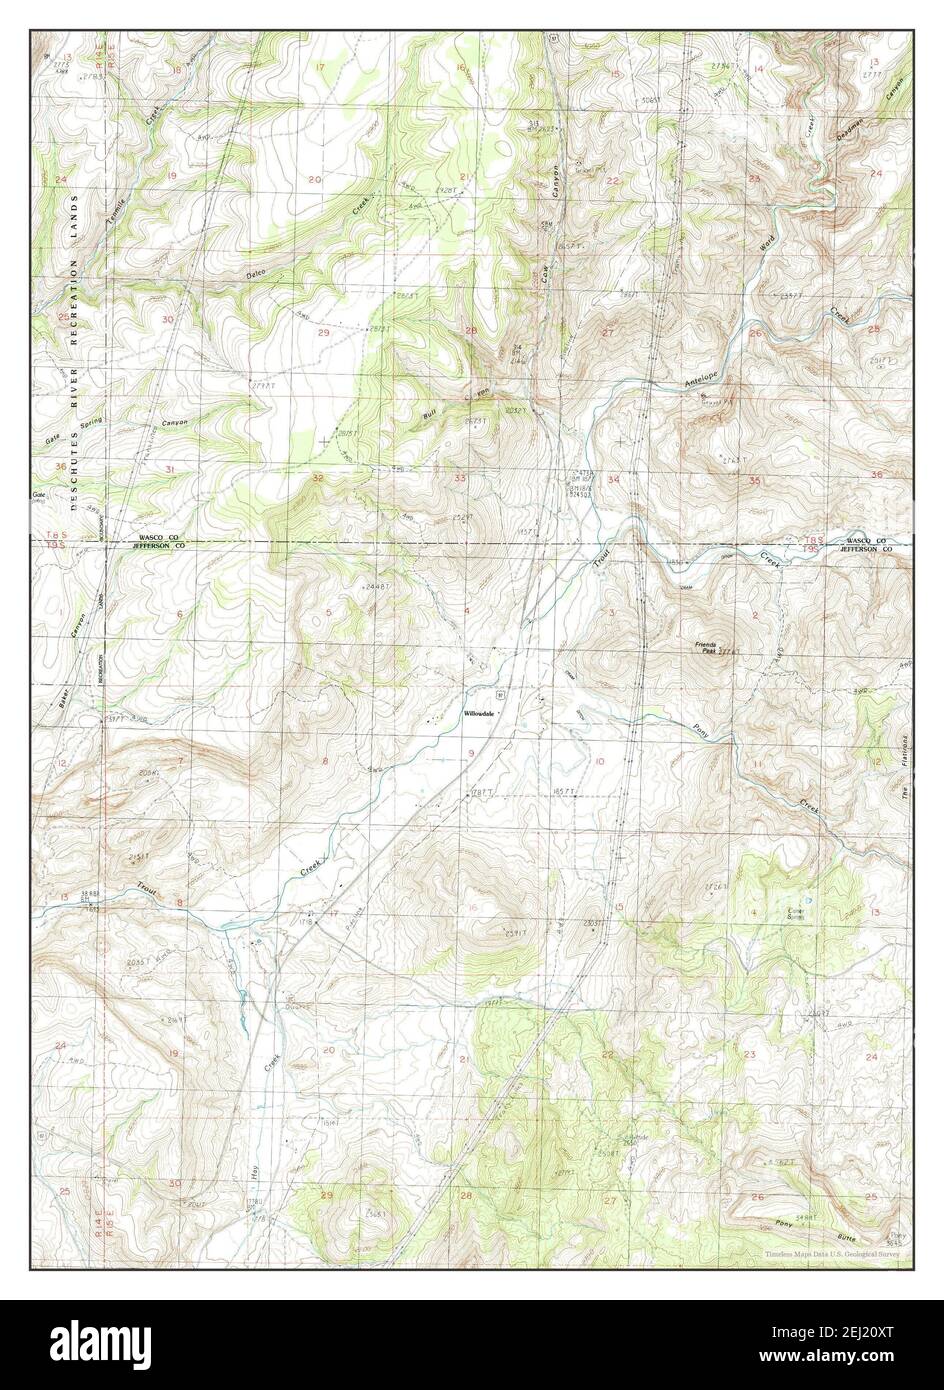 Willowdale, Oregon, map 1987, 1:24000, United States of America by Timeless Maps, data U.S. Geological Survey Stock Photo